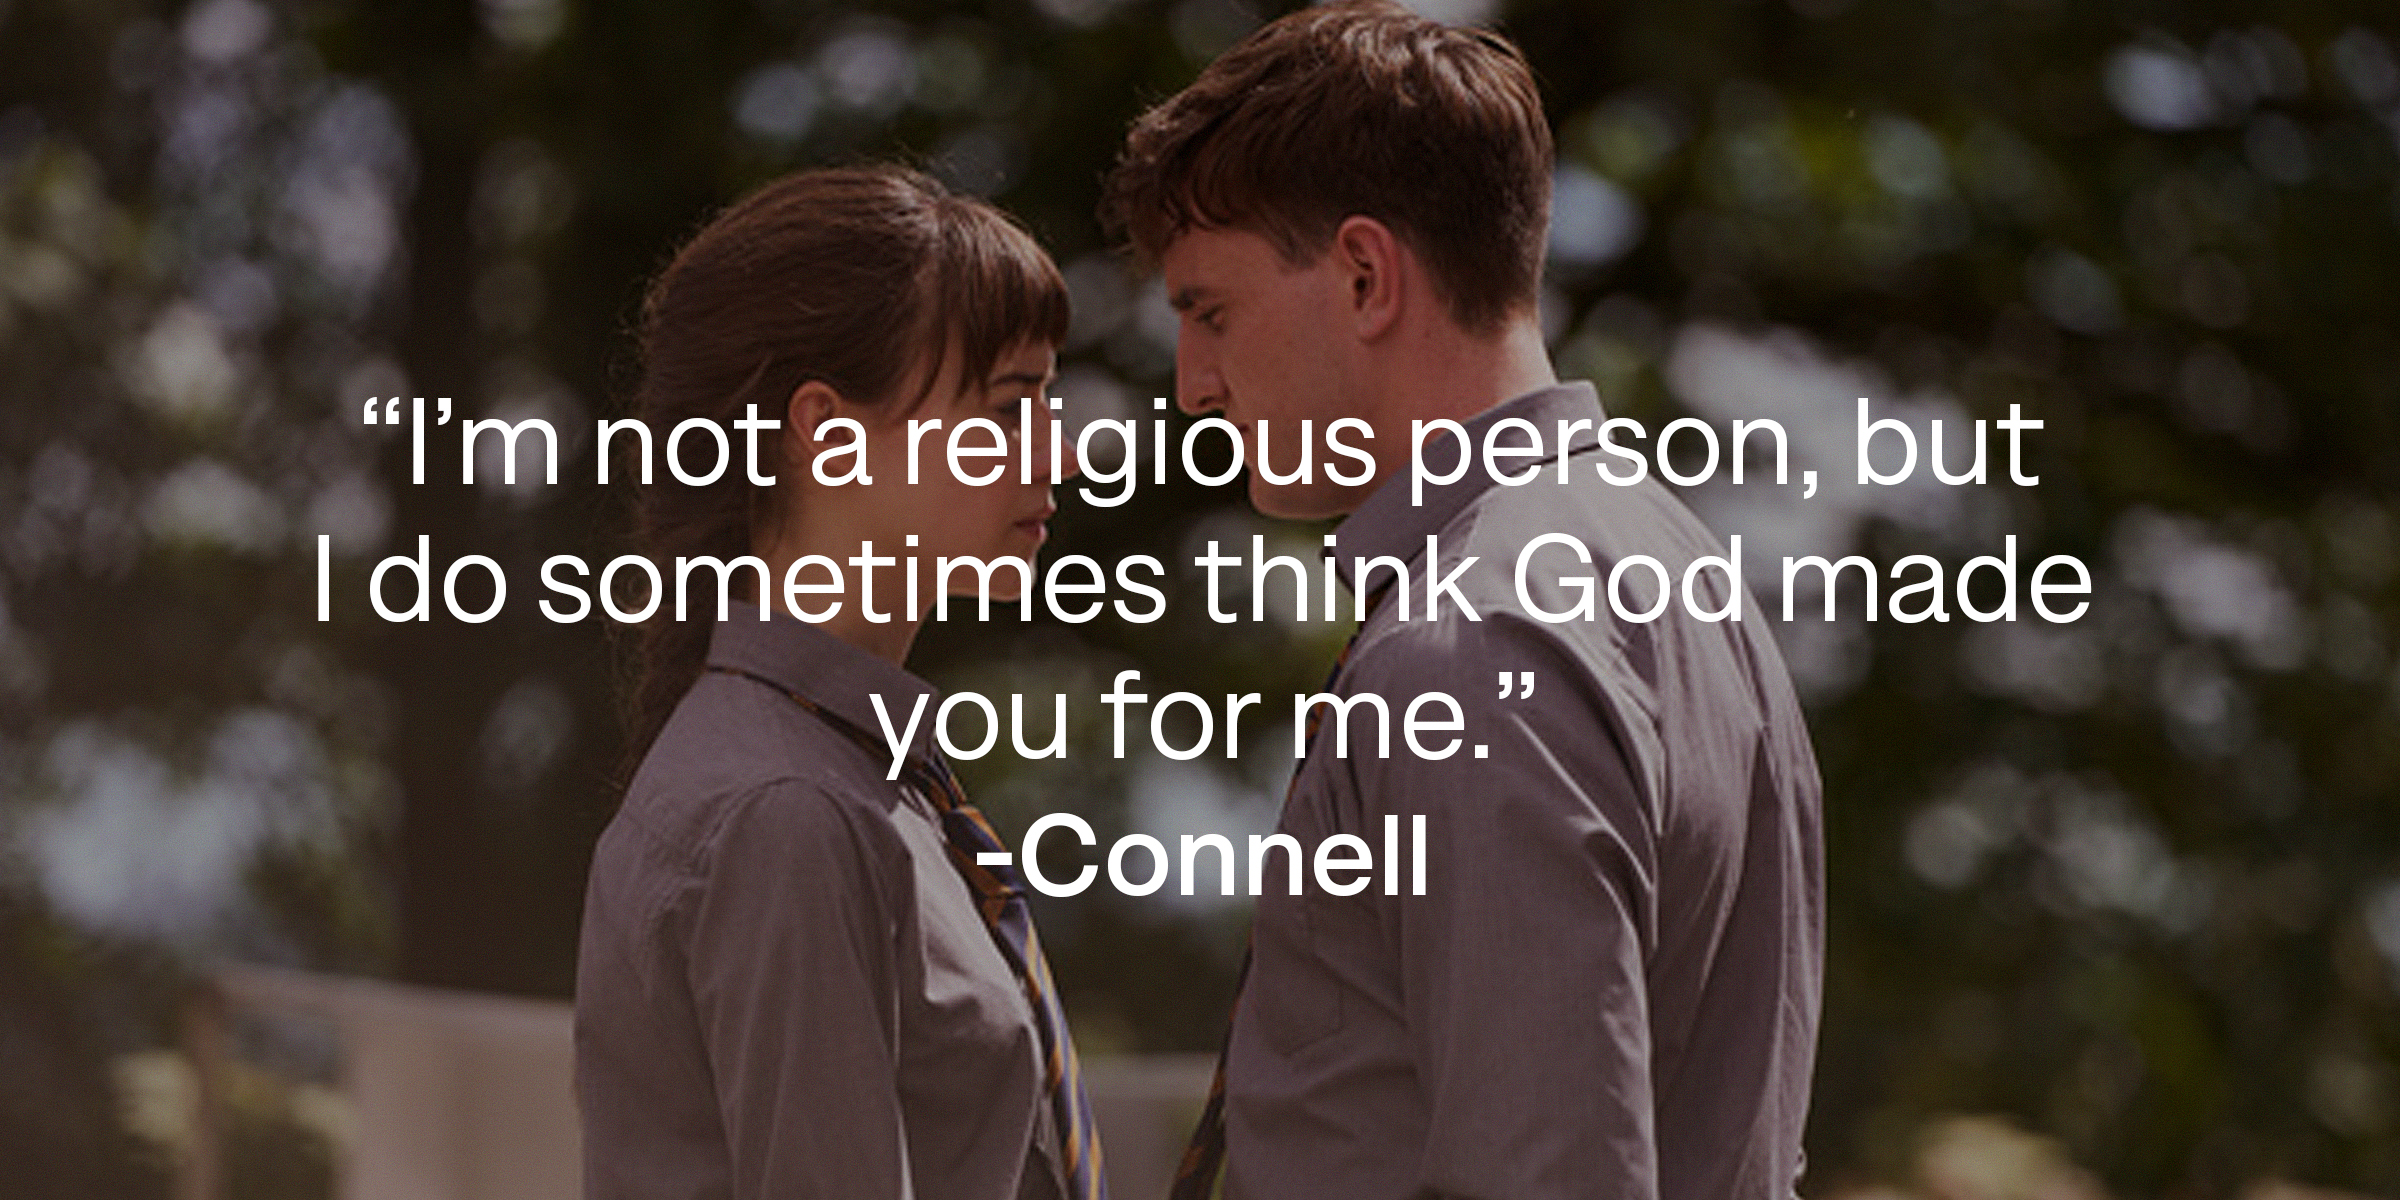 Marianne and Connell, with Connell’s quote: “I’m not a religious person, but I do sometimes think God made you for me.” |Source: facebook.com/normalpeoplebbc